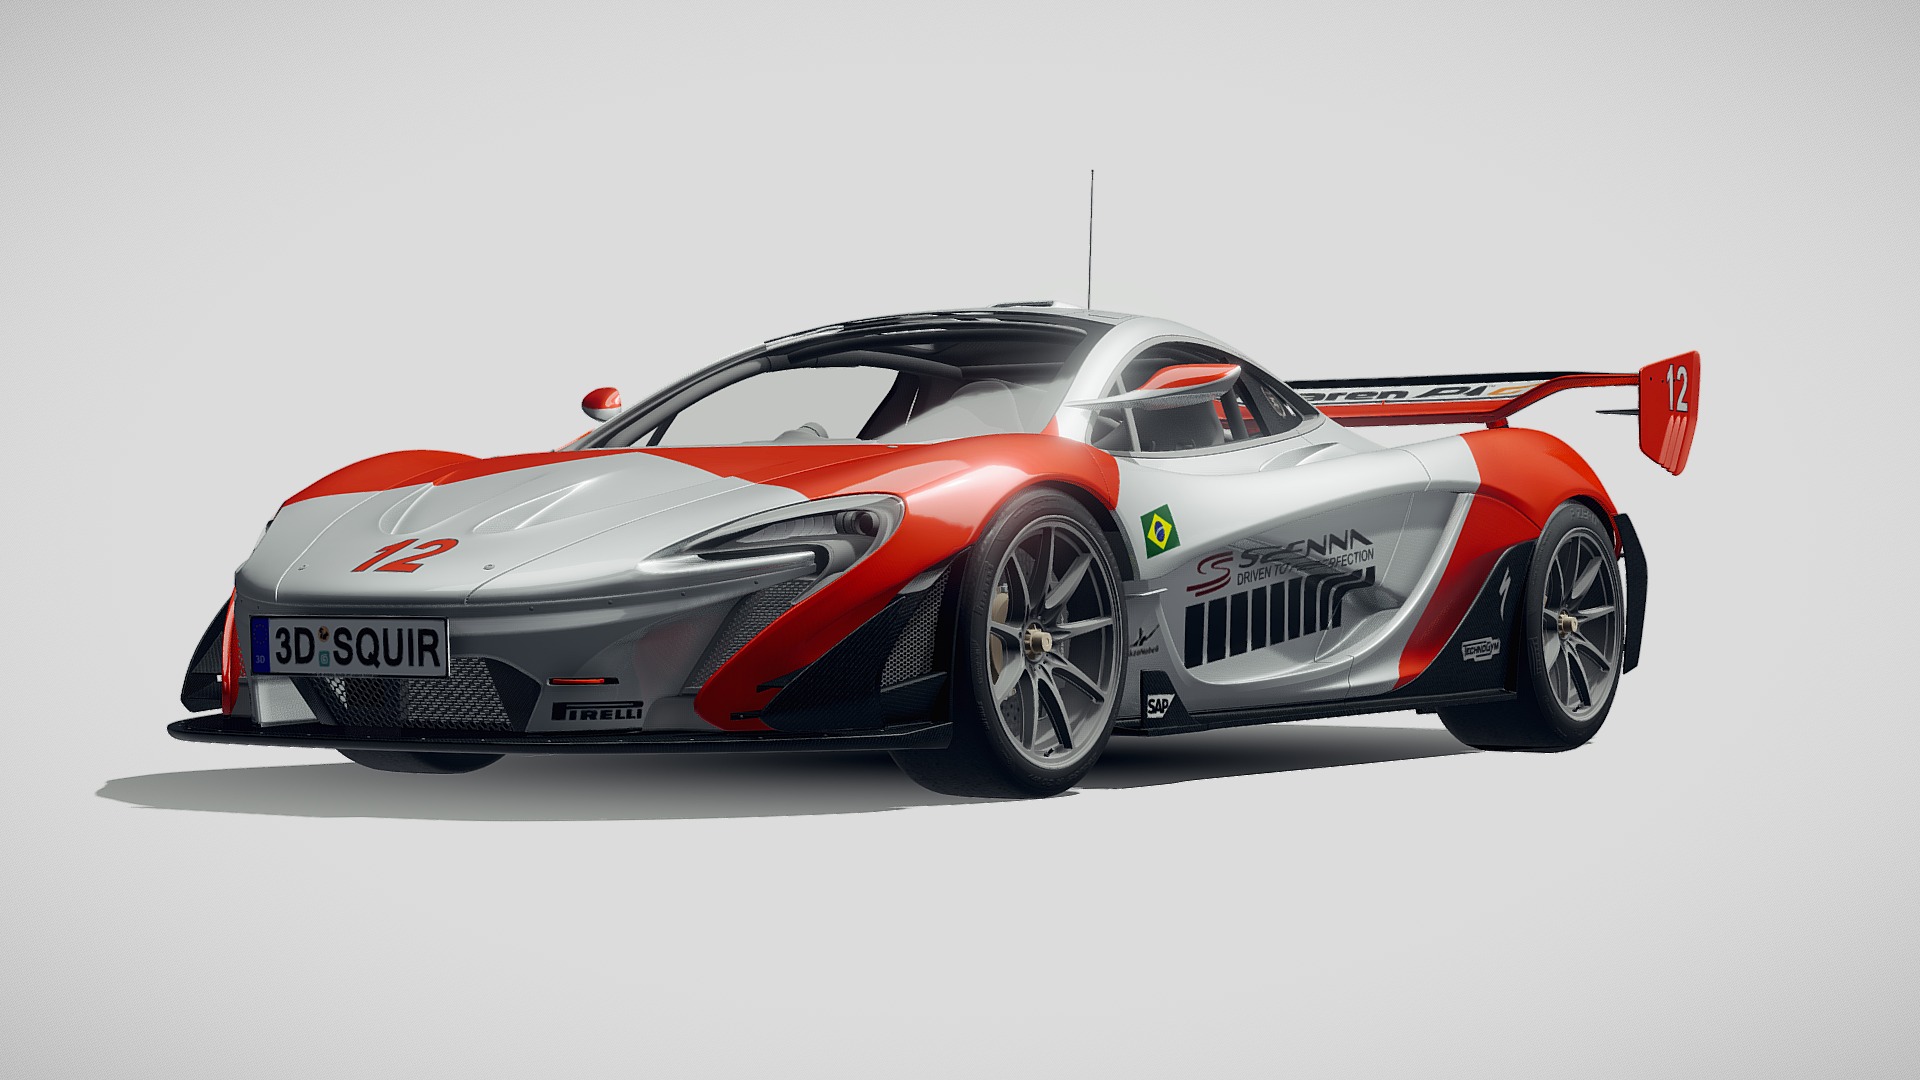 3D model McLaren P1 GTR Senna 2019 - This is a 3D model of the McLaren P1 GTR Senna 2019. The 3D model is about a red and white sports car.